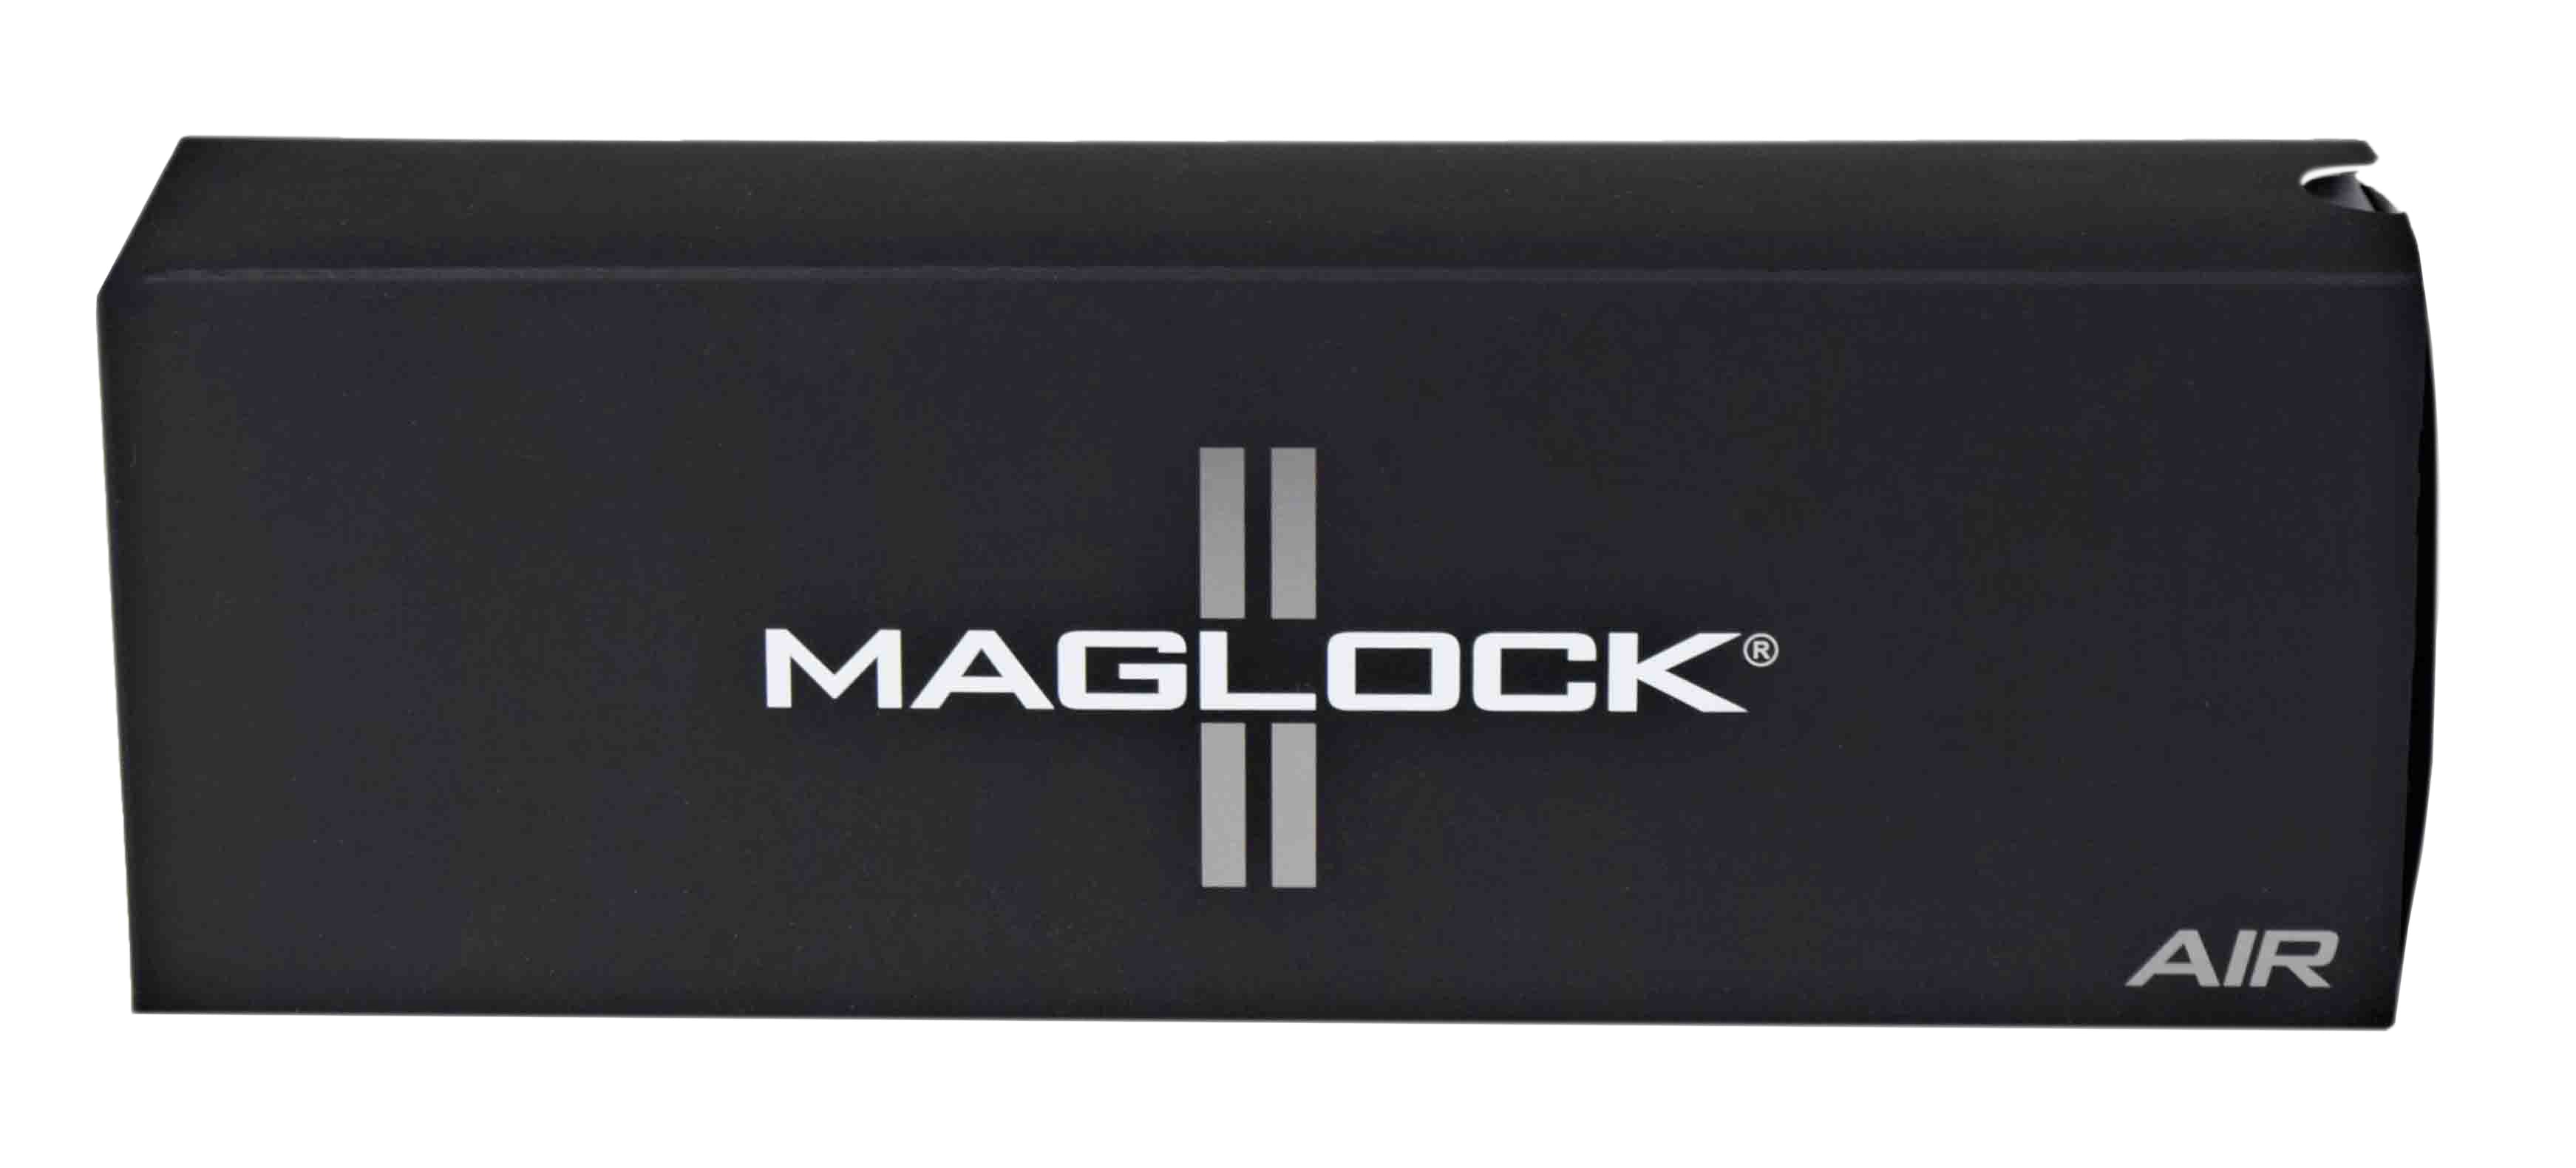 Maglock Magnetic Forced Air Helmet Coupling System Safe Quick Connect and Detach (w/ Keychain)